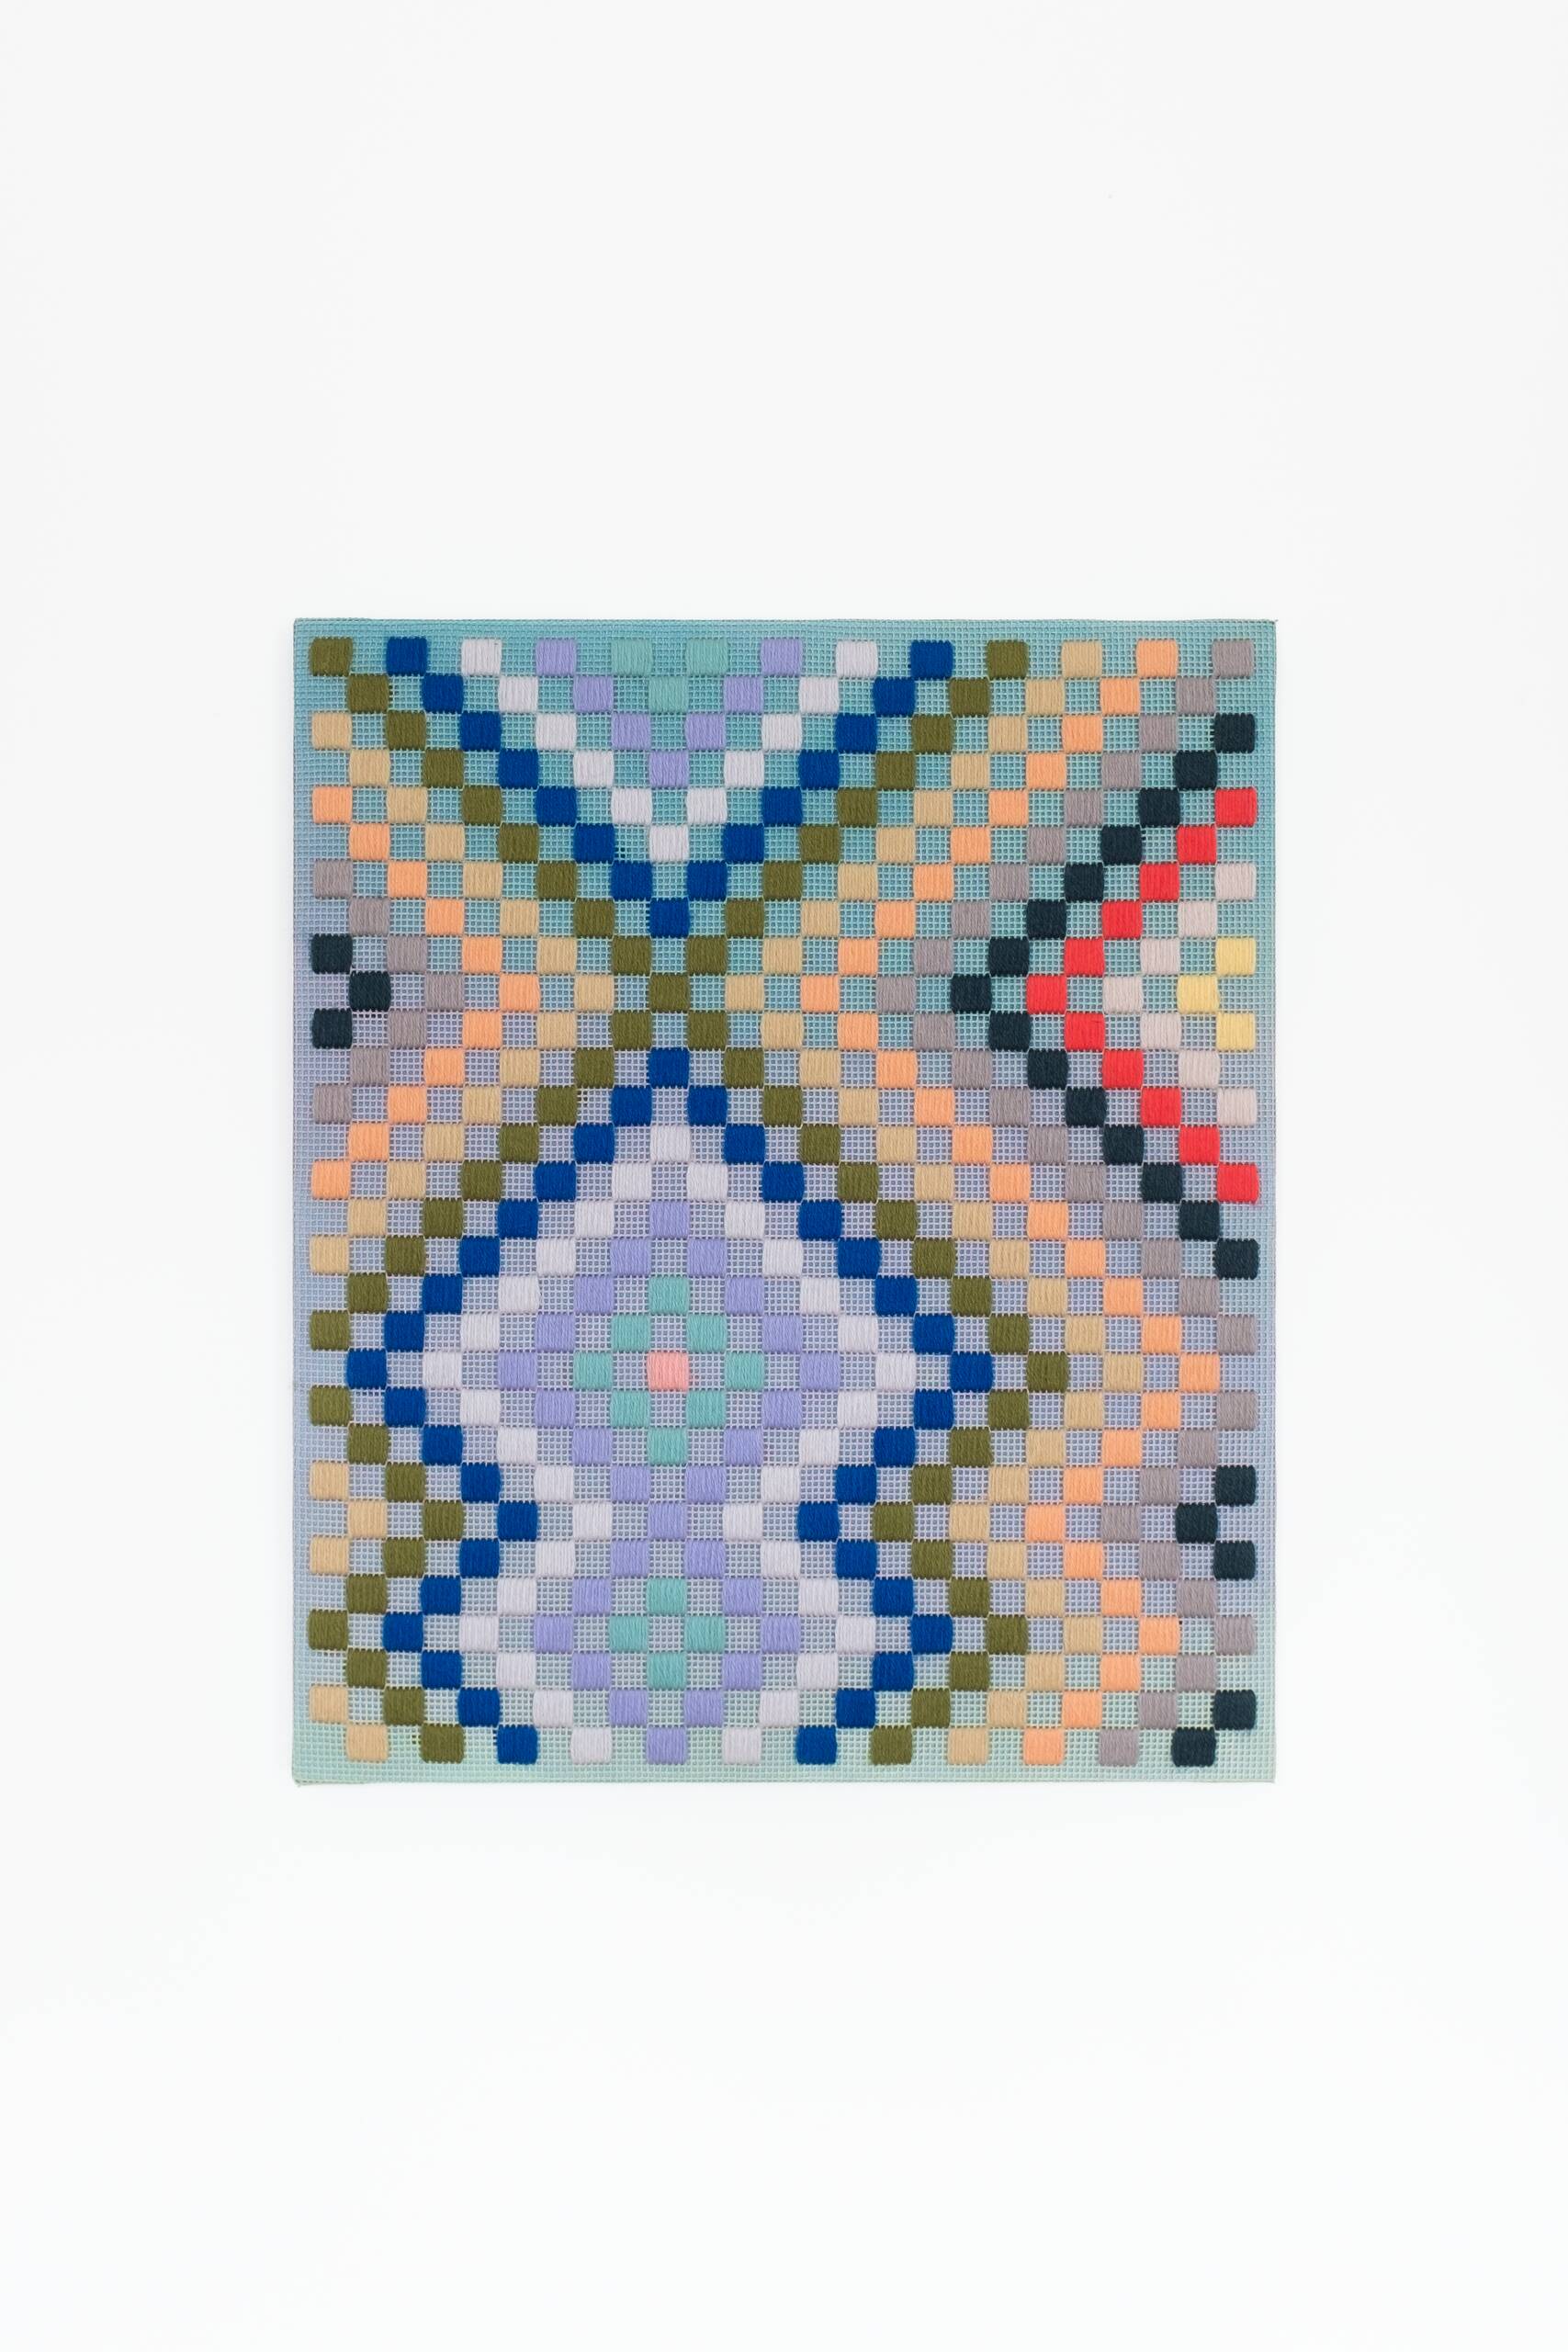 Punch card -- Patchwork [green], Hand-embroidered wool yarn and acrylic paint on canvas, 2022